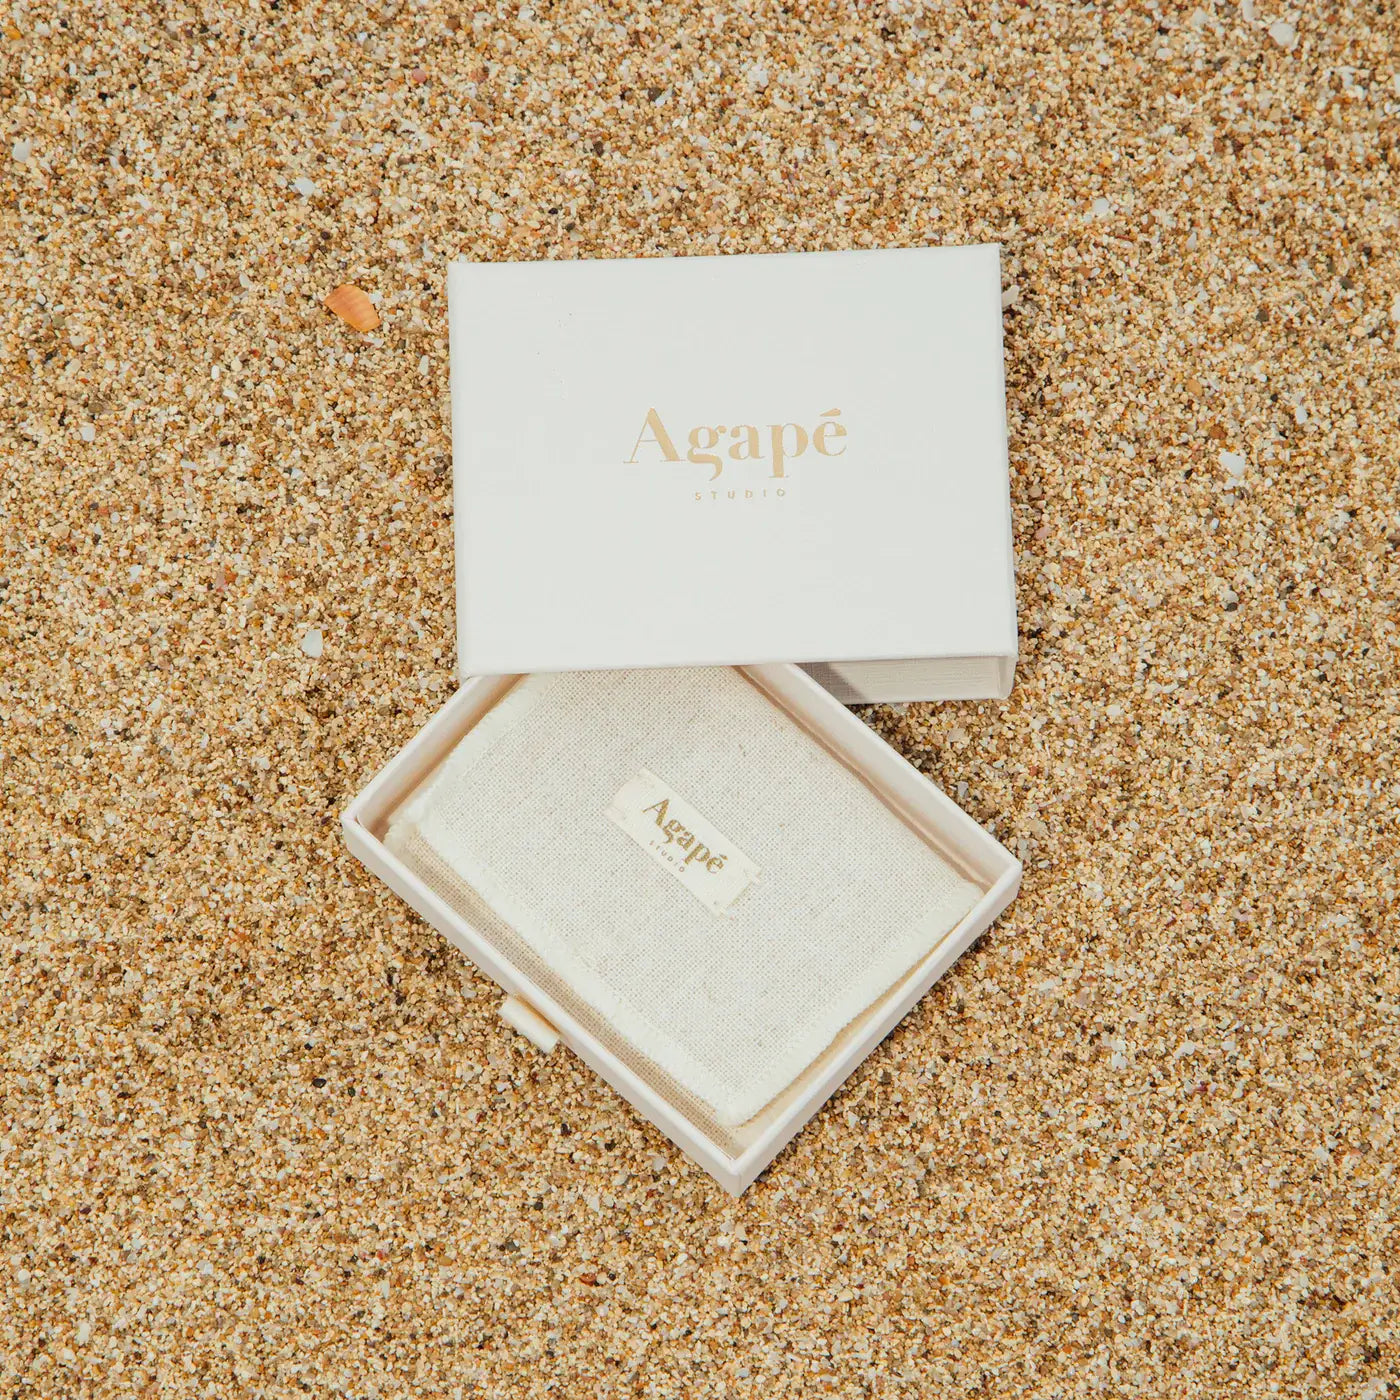 Marguerite Ring | Jewelry Gold Gift Waterproof - Shop Wild Ivy